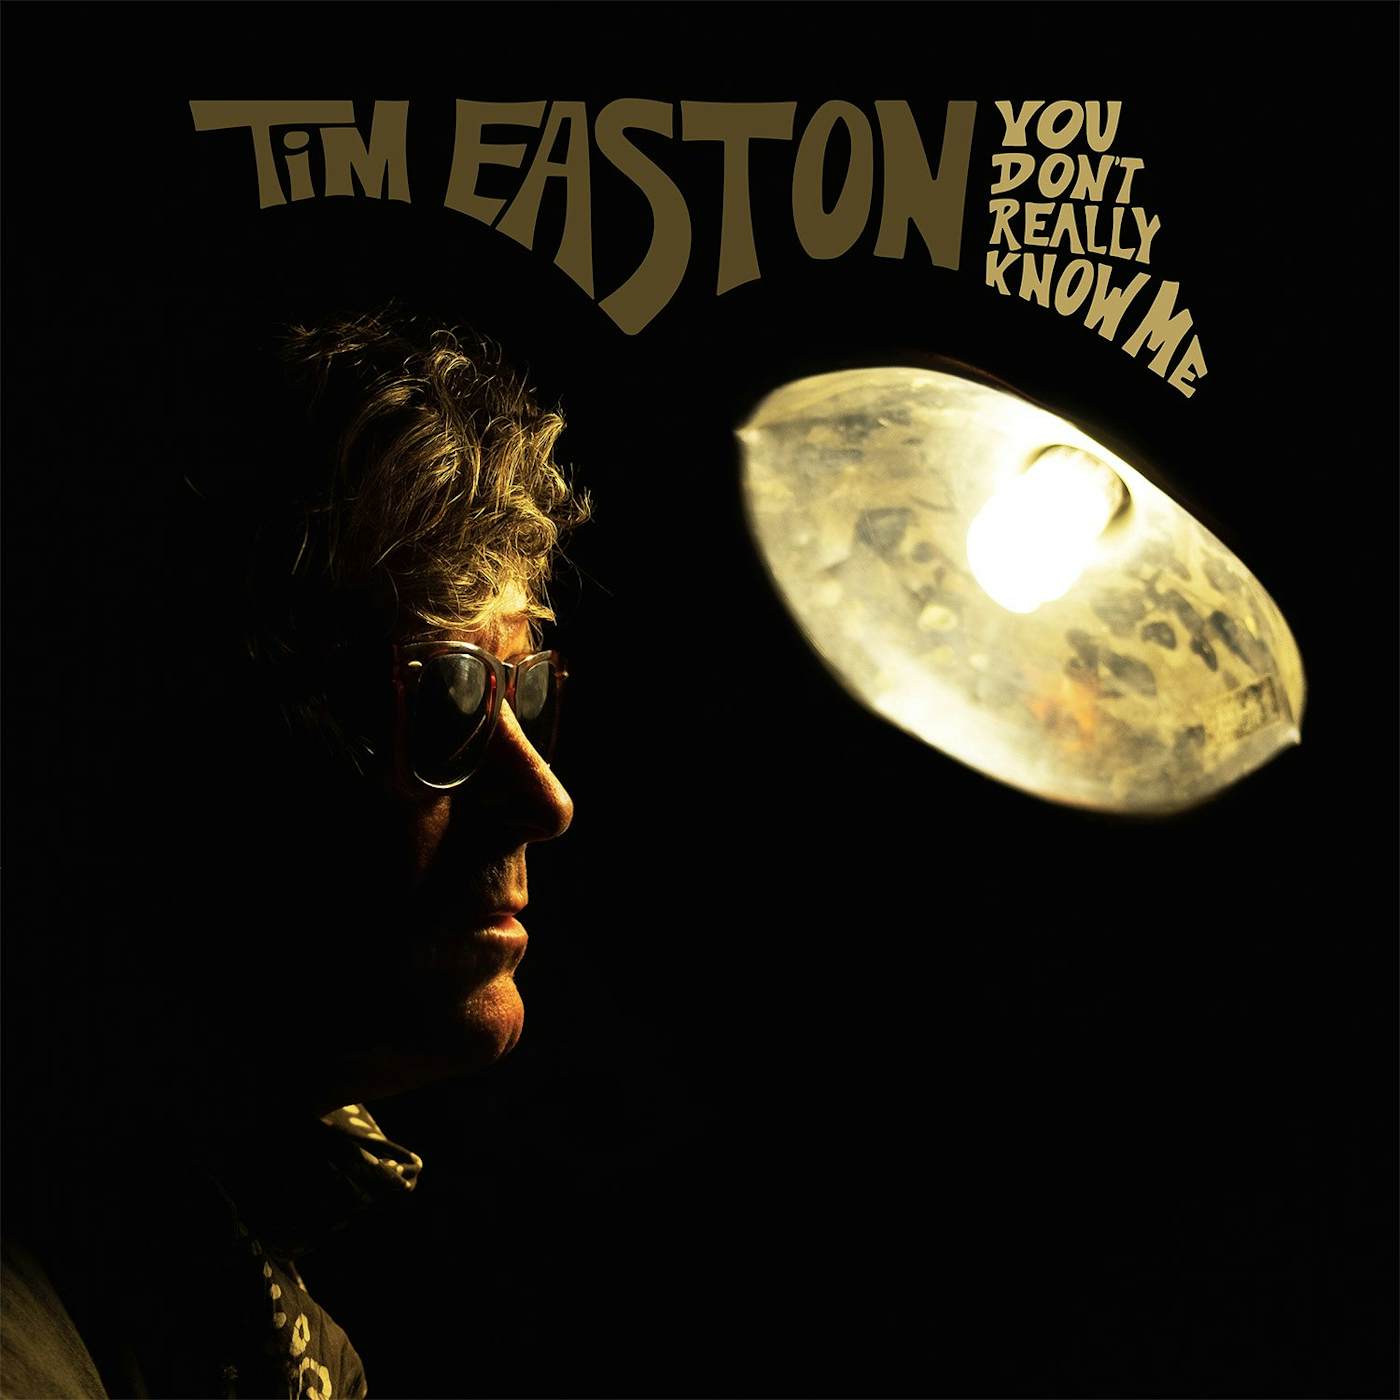 Tim Easton You Don't Really Know Me CD